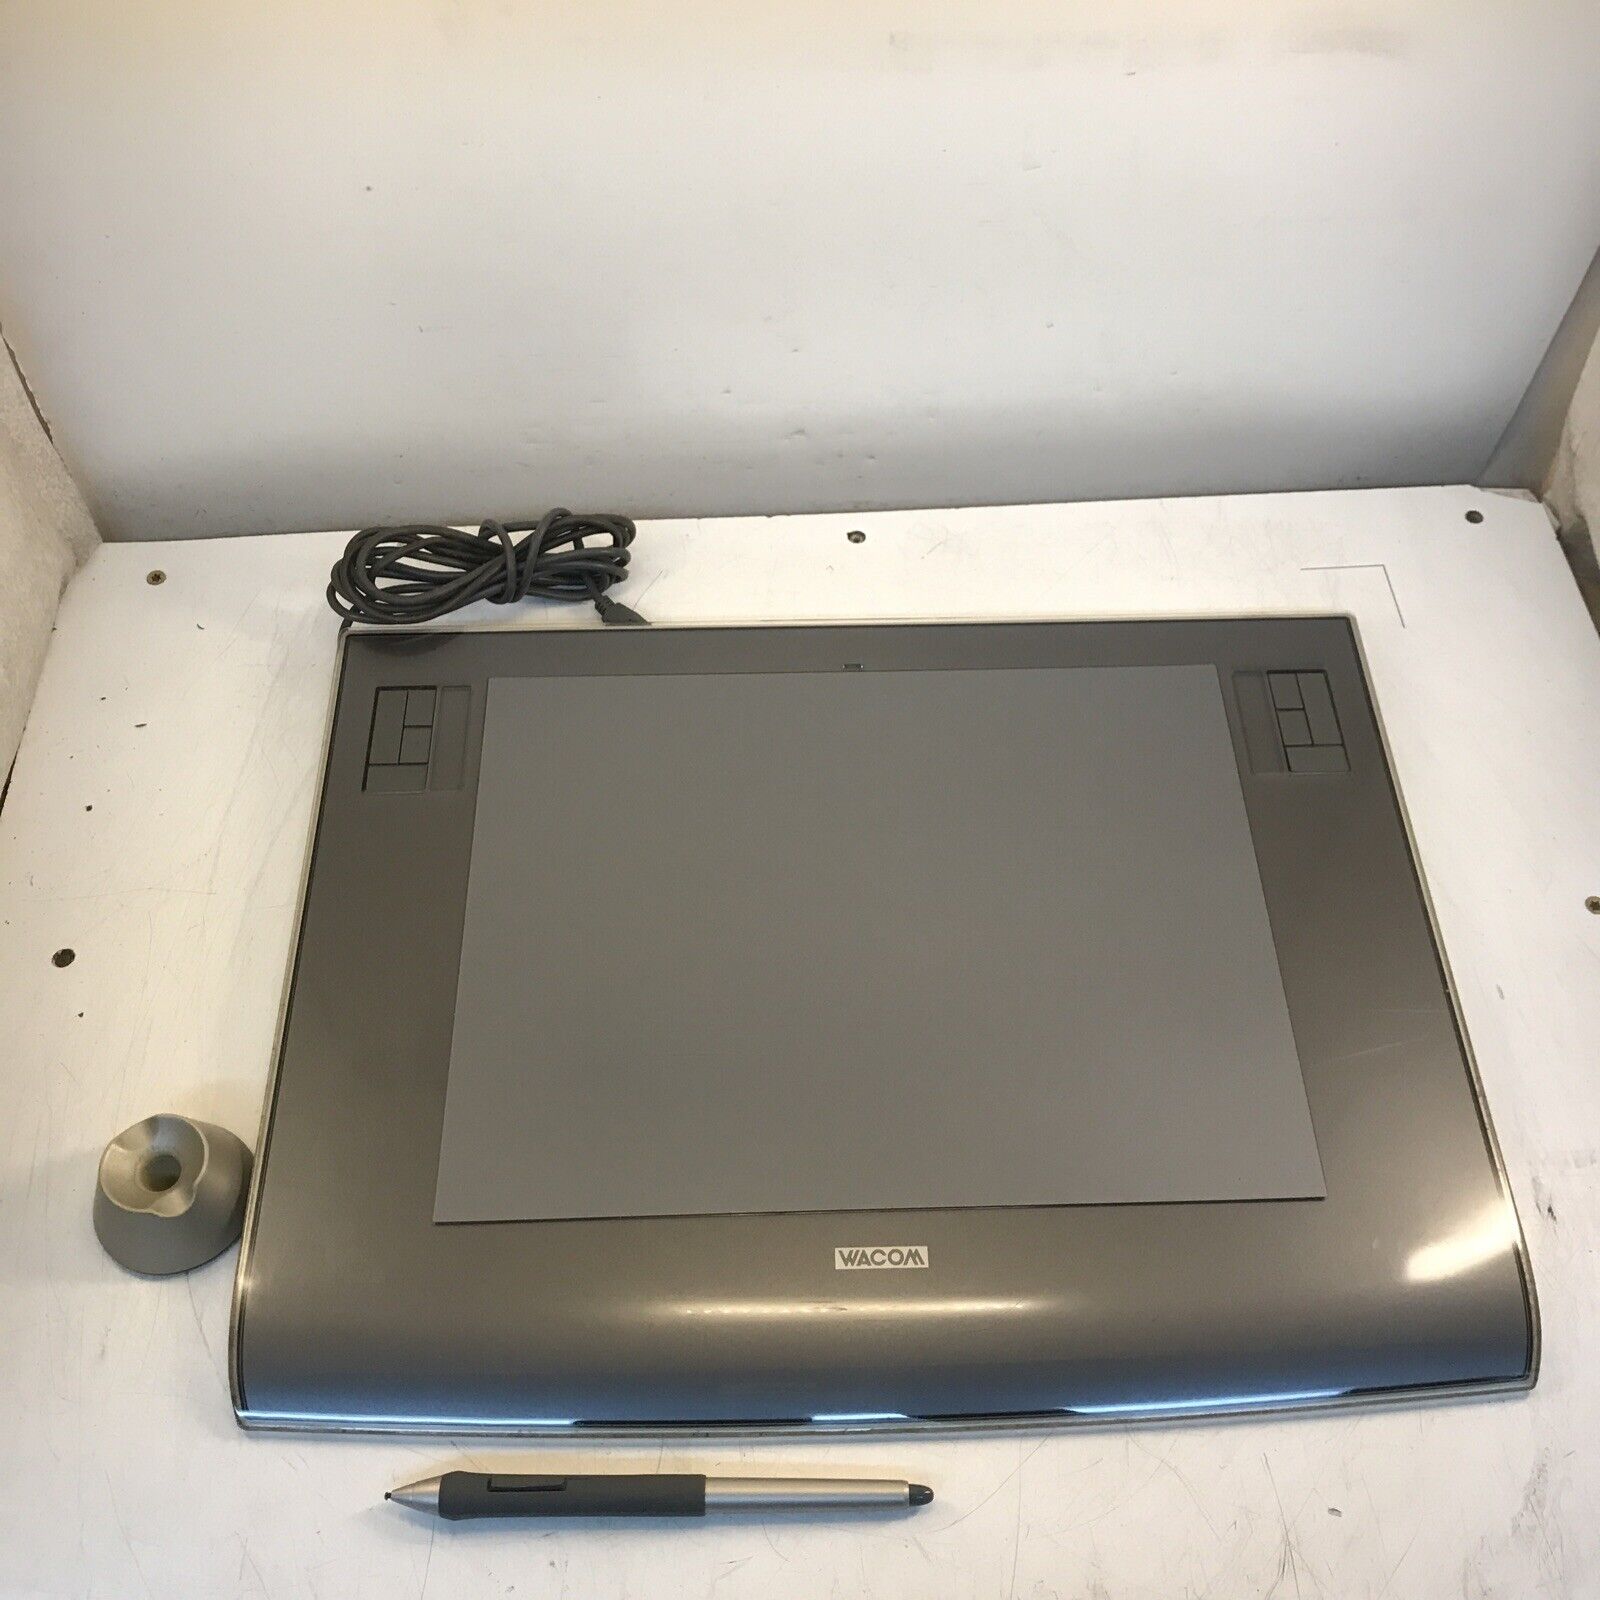 Wacom Intuos 3 , PTZ-930, 9x12 Inch Pen Tablet, Stylus tested working